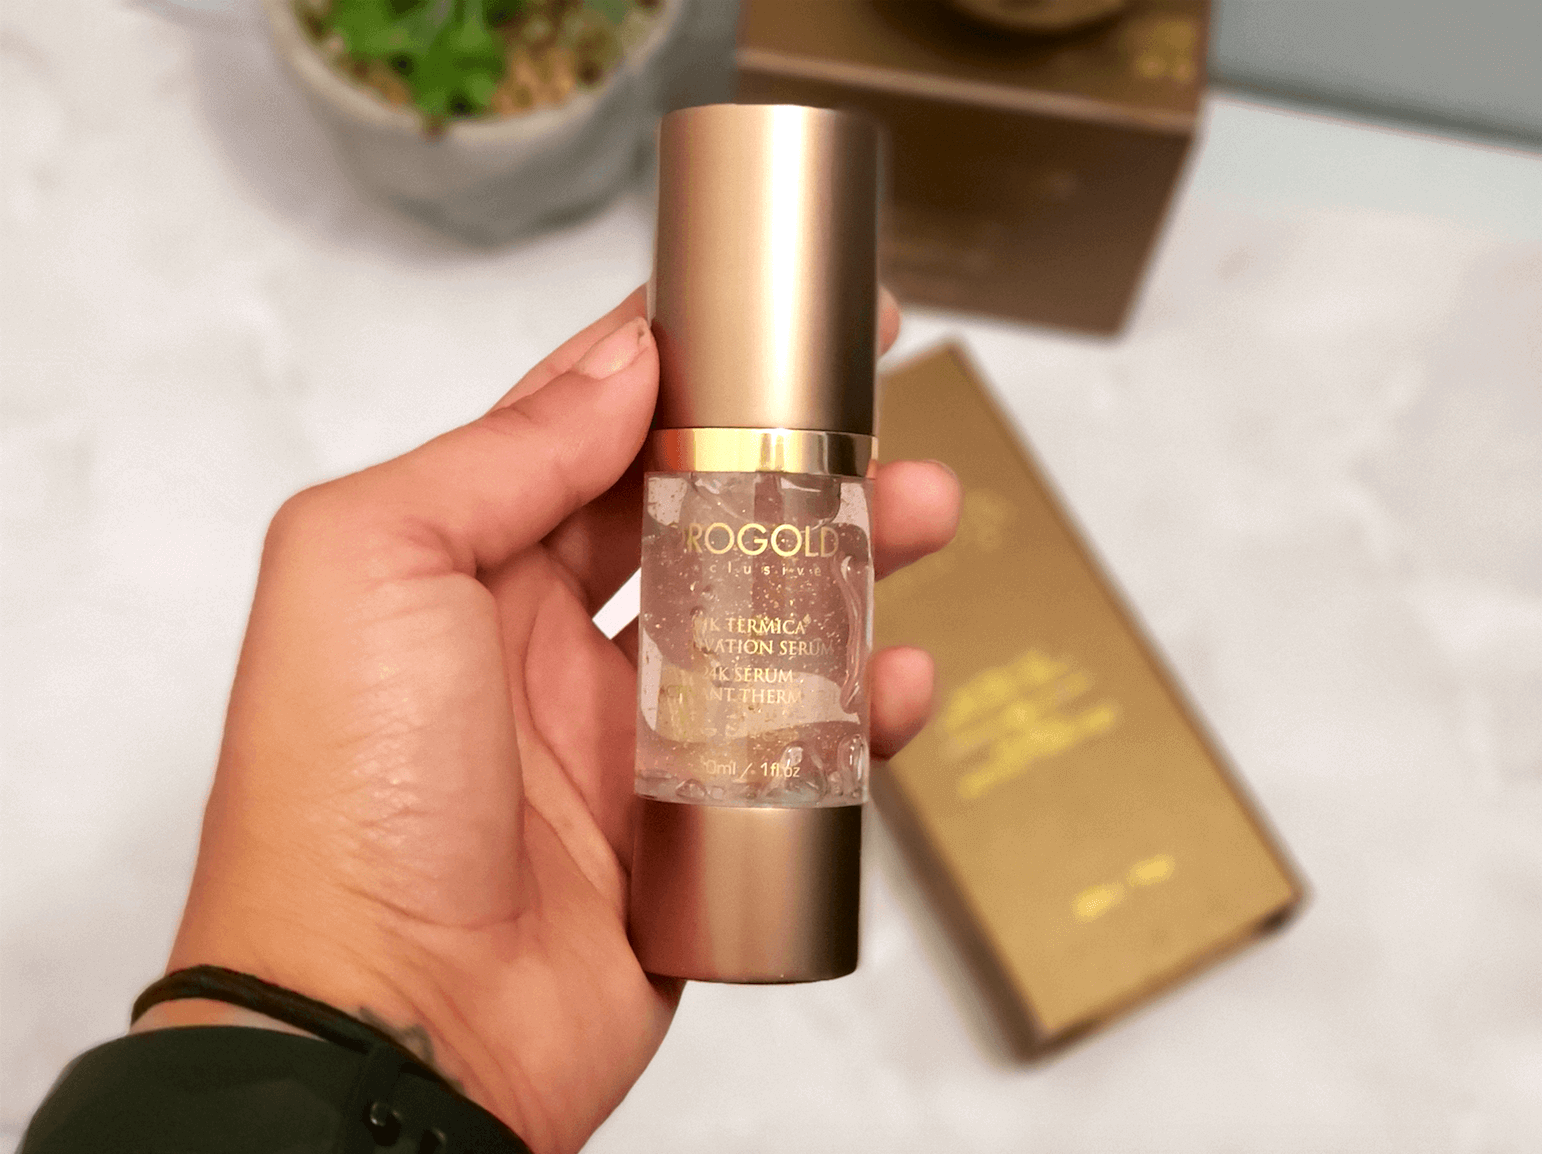 Review of Orogold 24K Tèrmica® Activation Serum